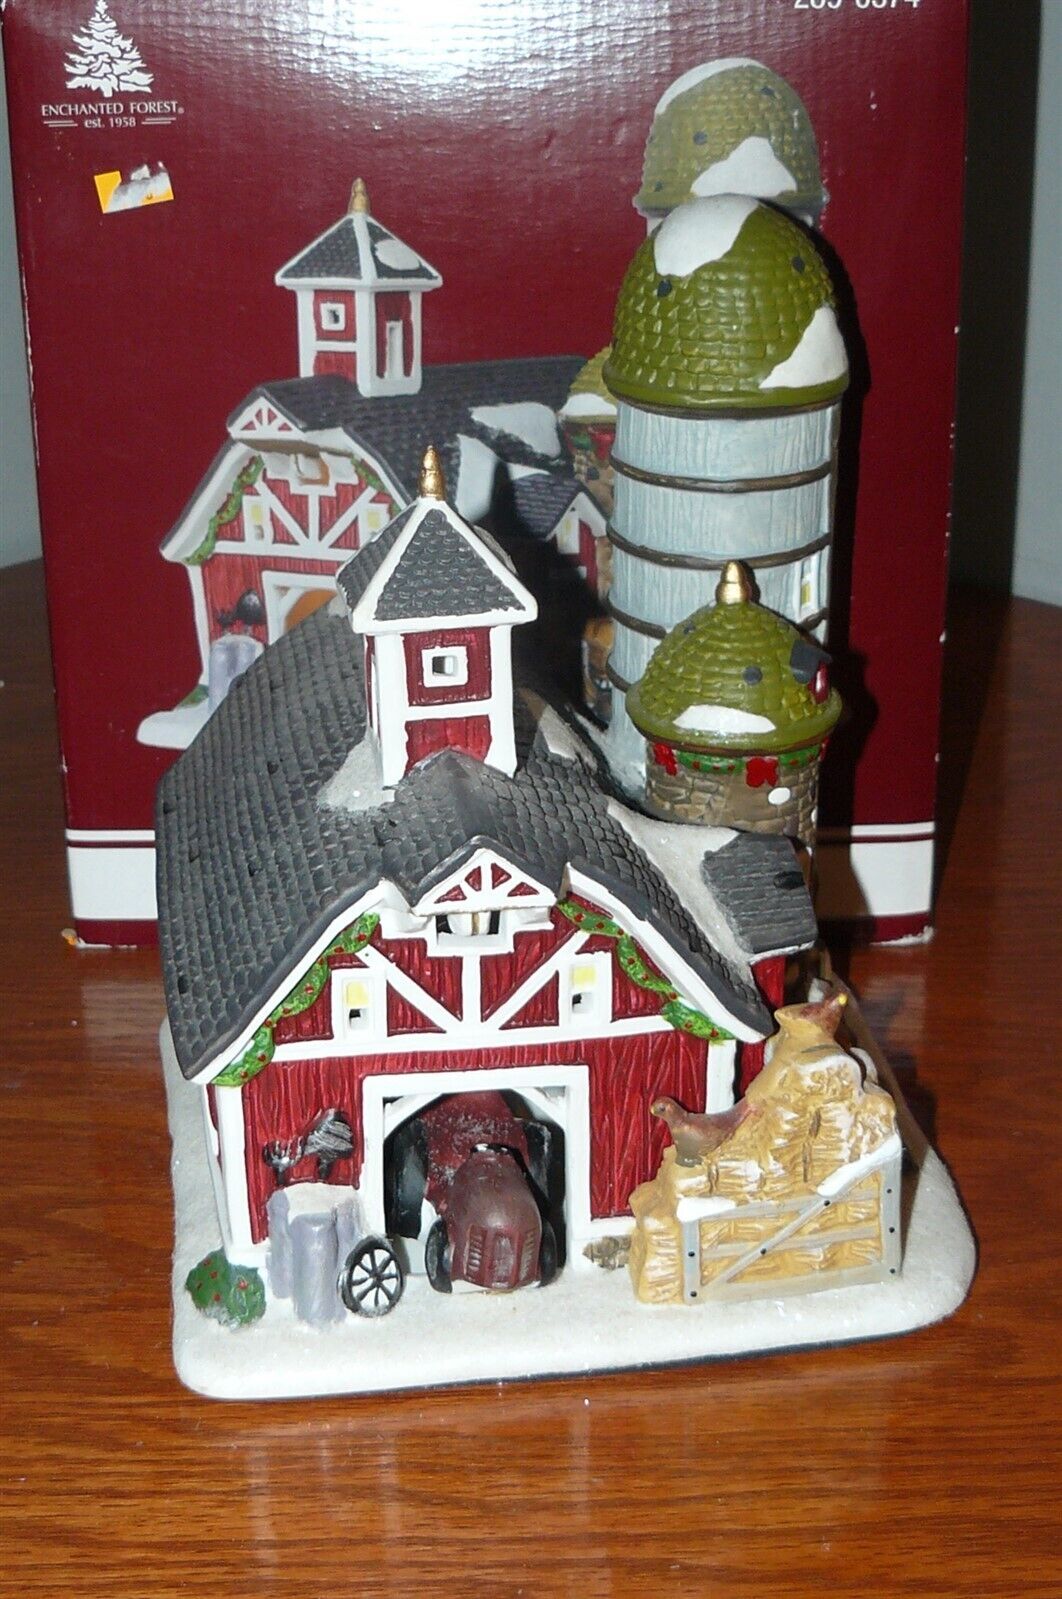 Menards Enchanted Forest Red Barn Christmas Village House MIB